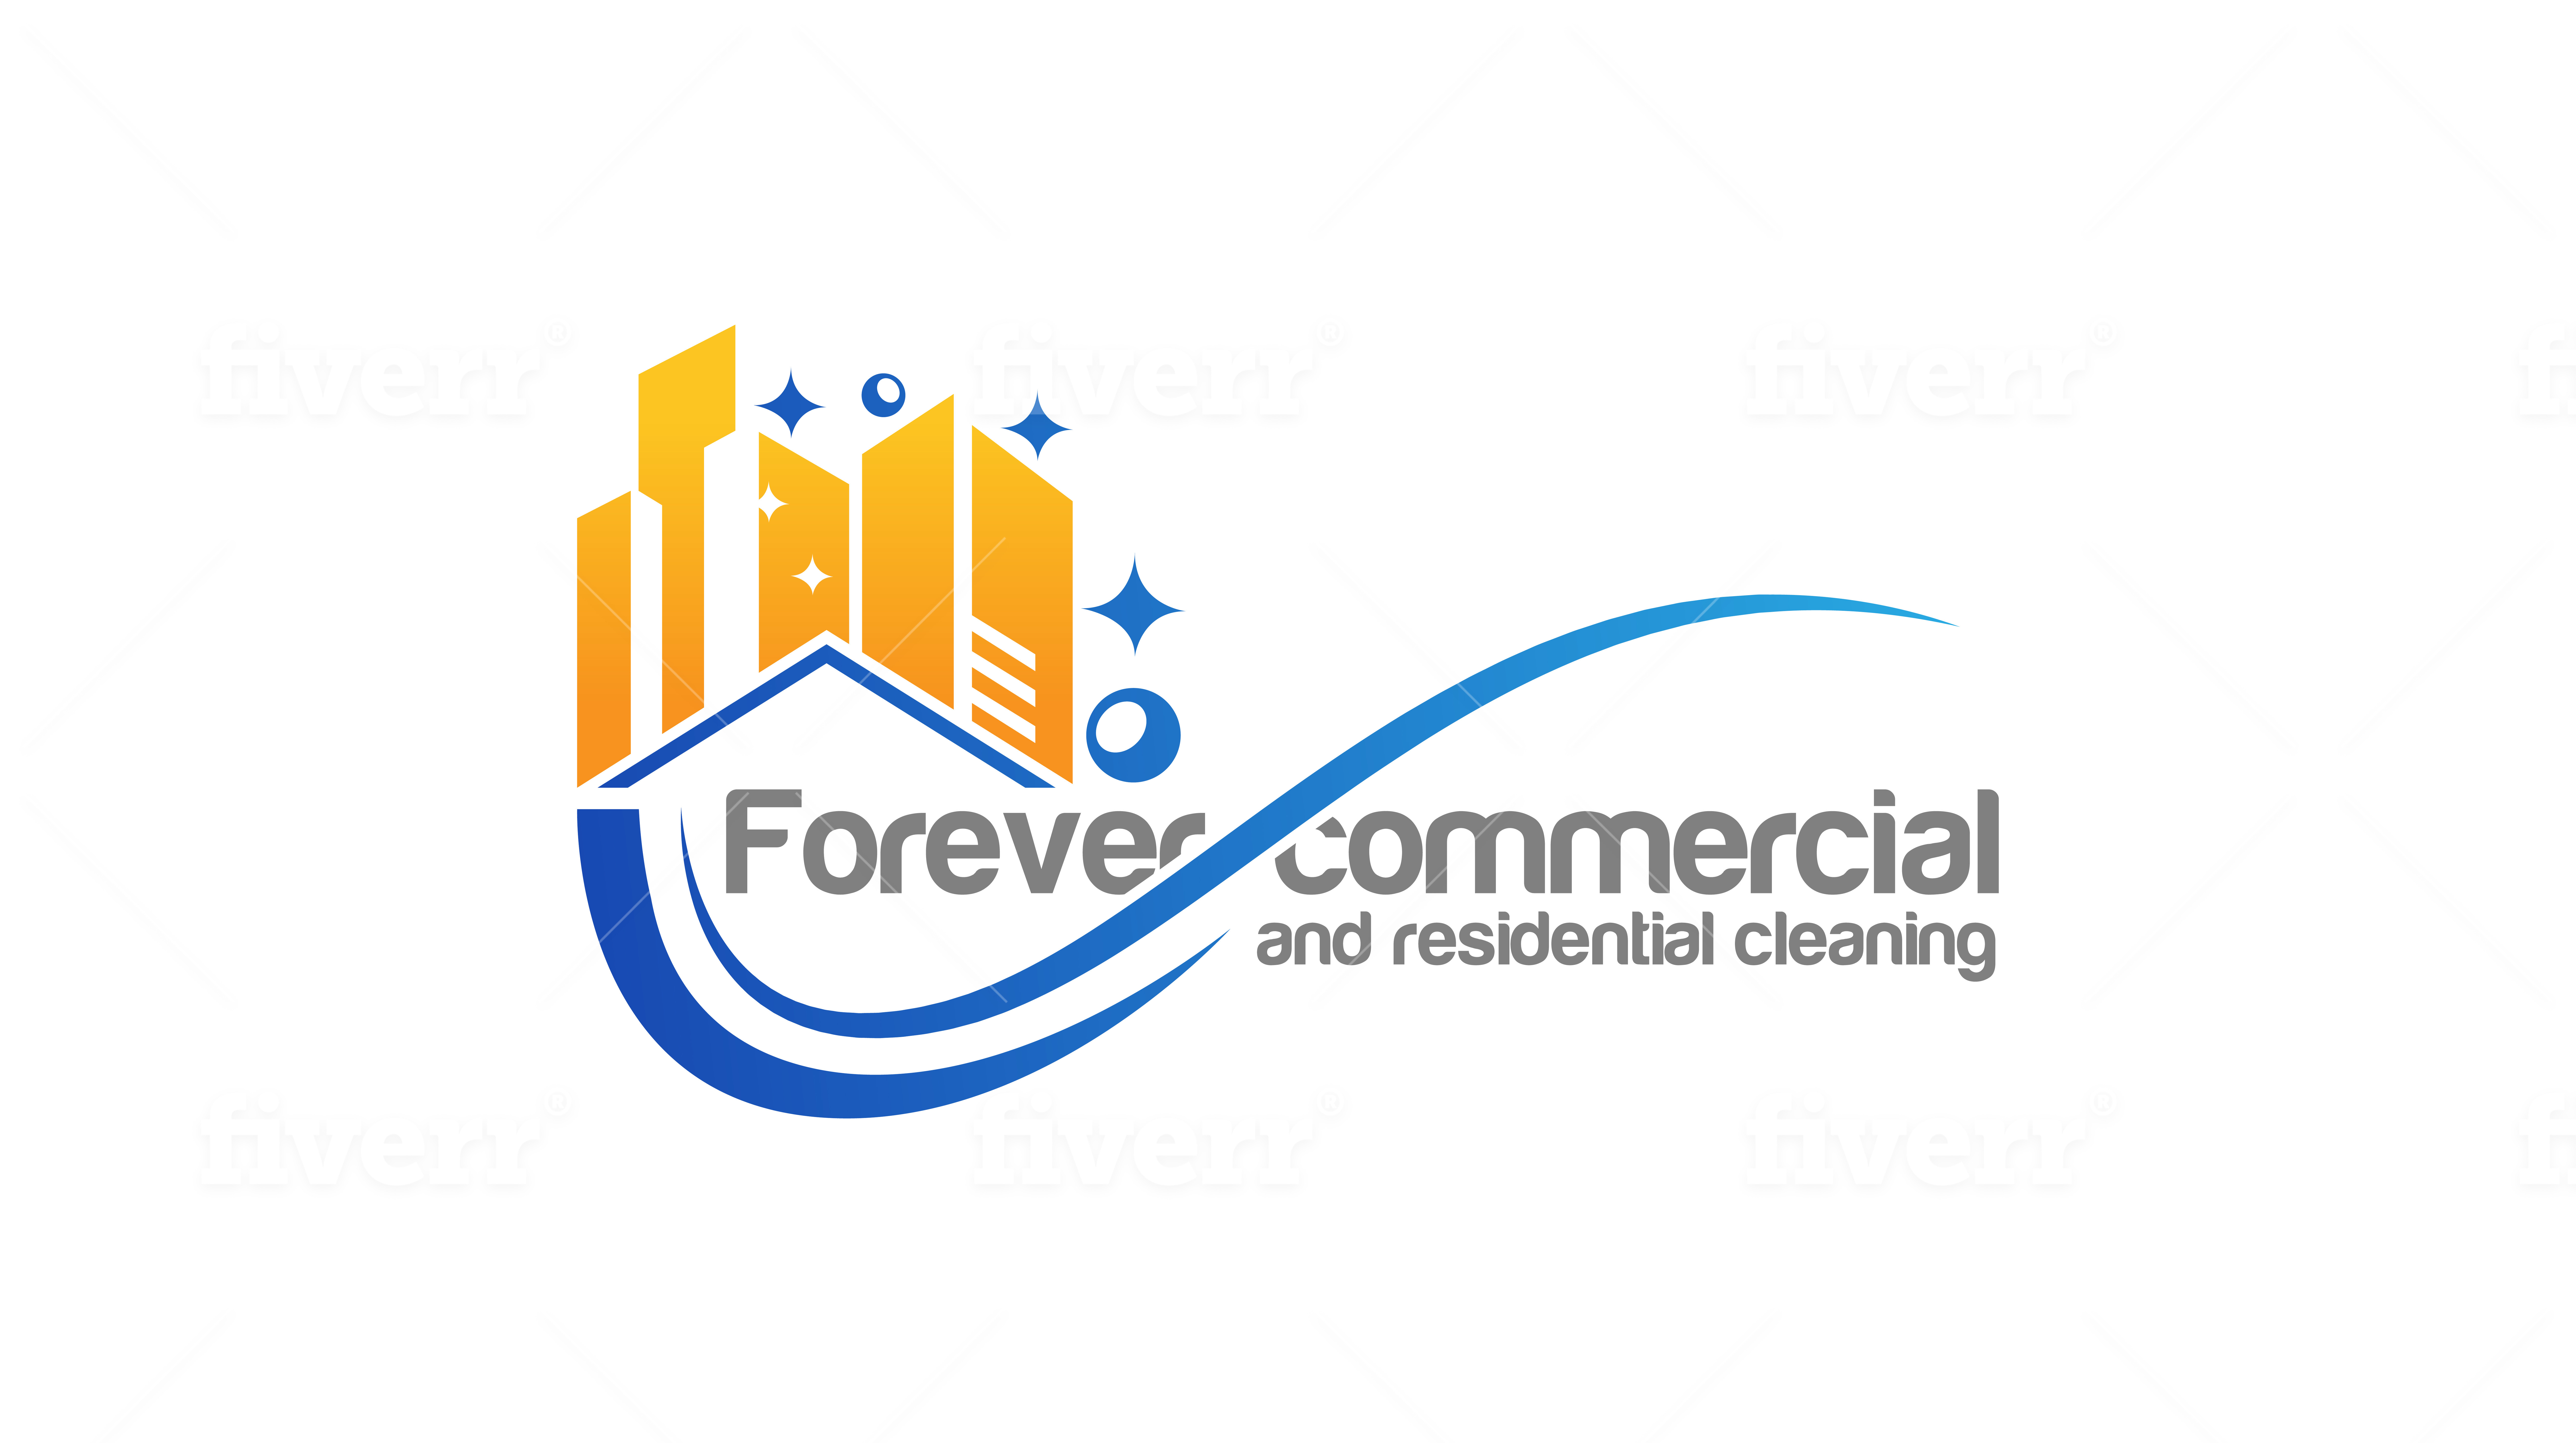 Forever Commercial and Residential Cleaning Service Logo